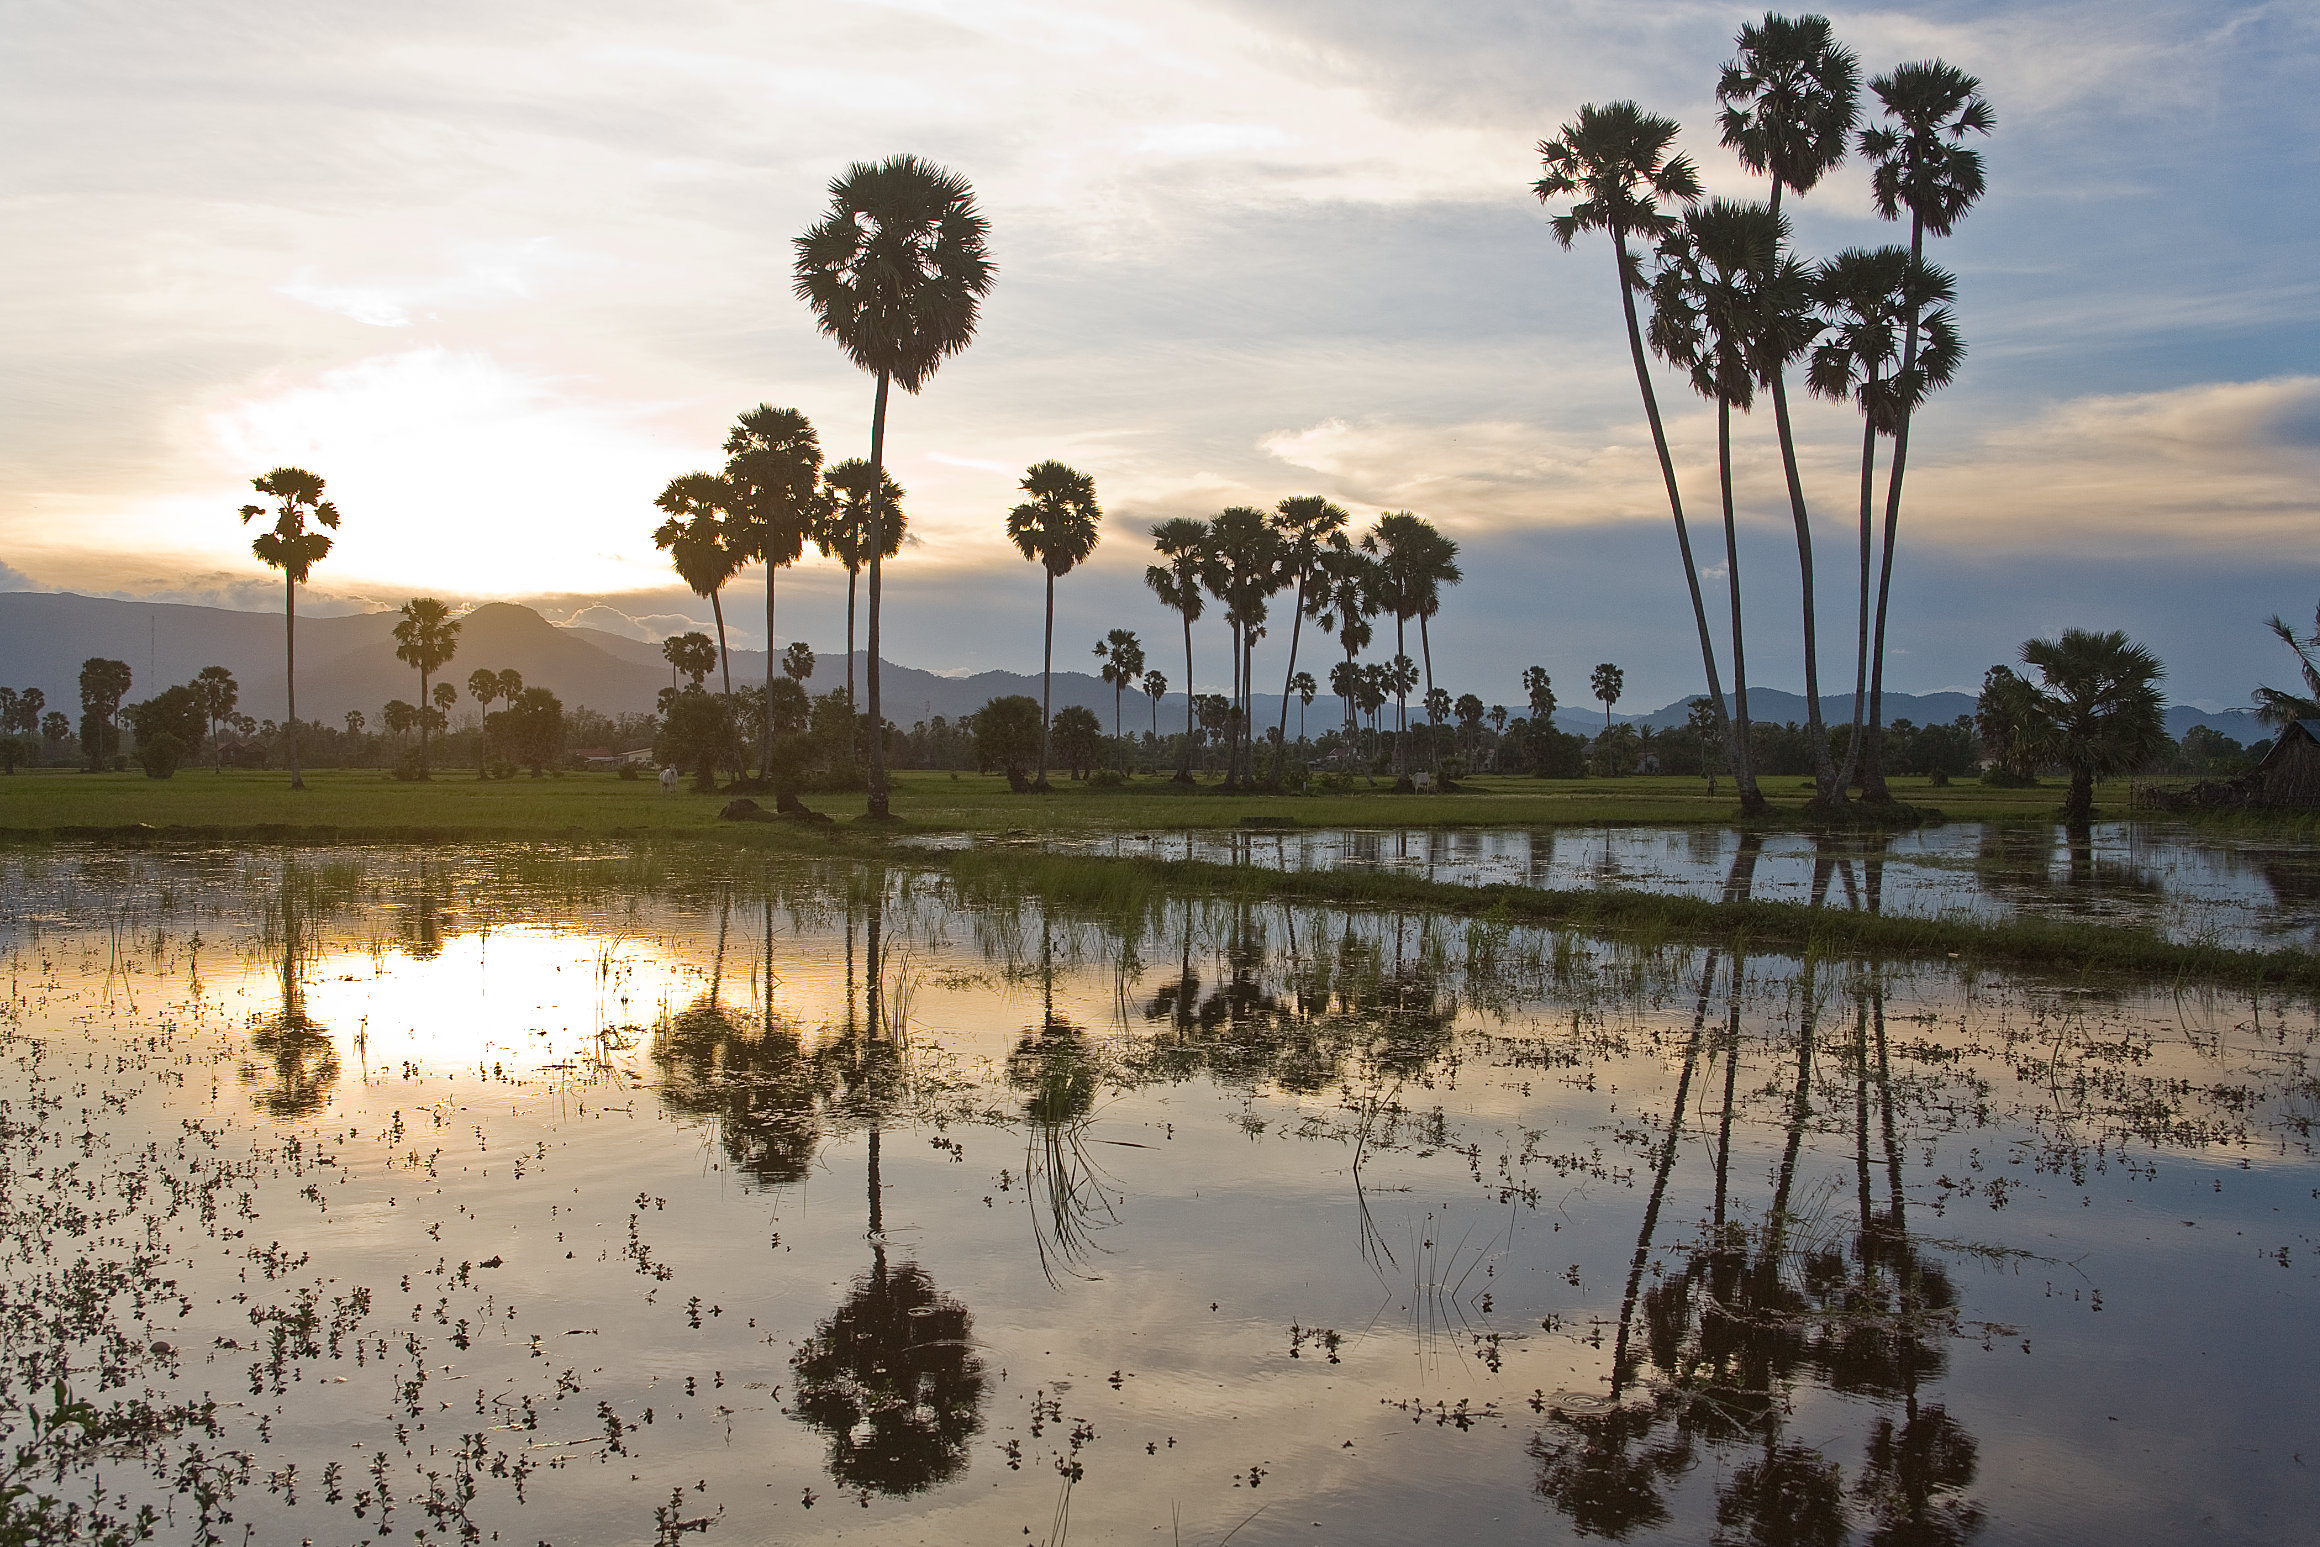 Palm trees reflected in a rice field, Cambodia